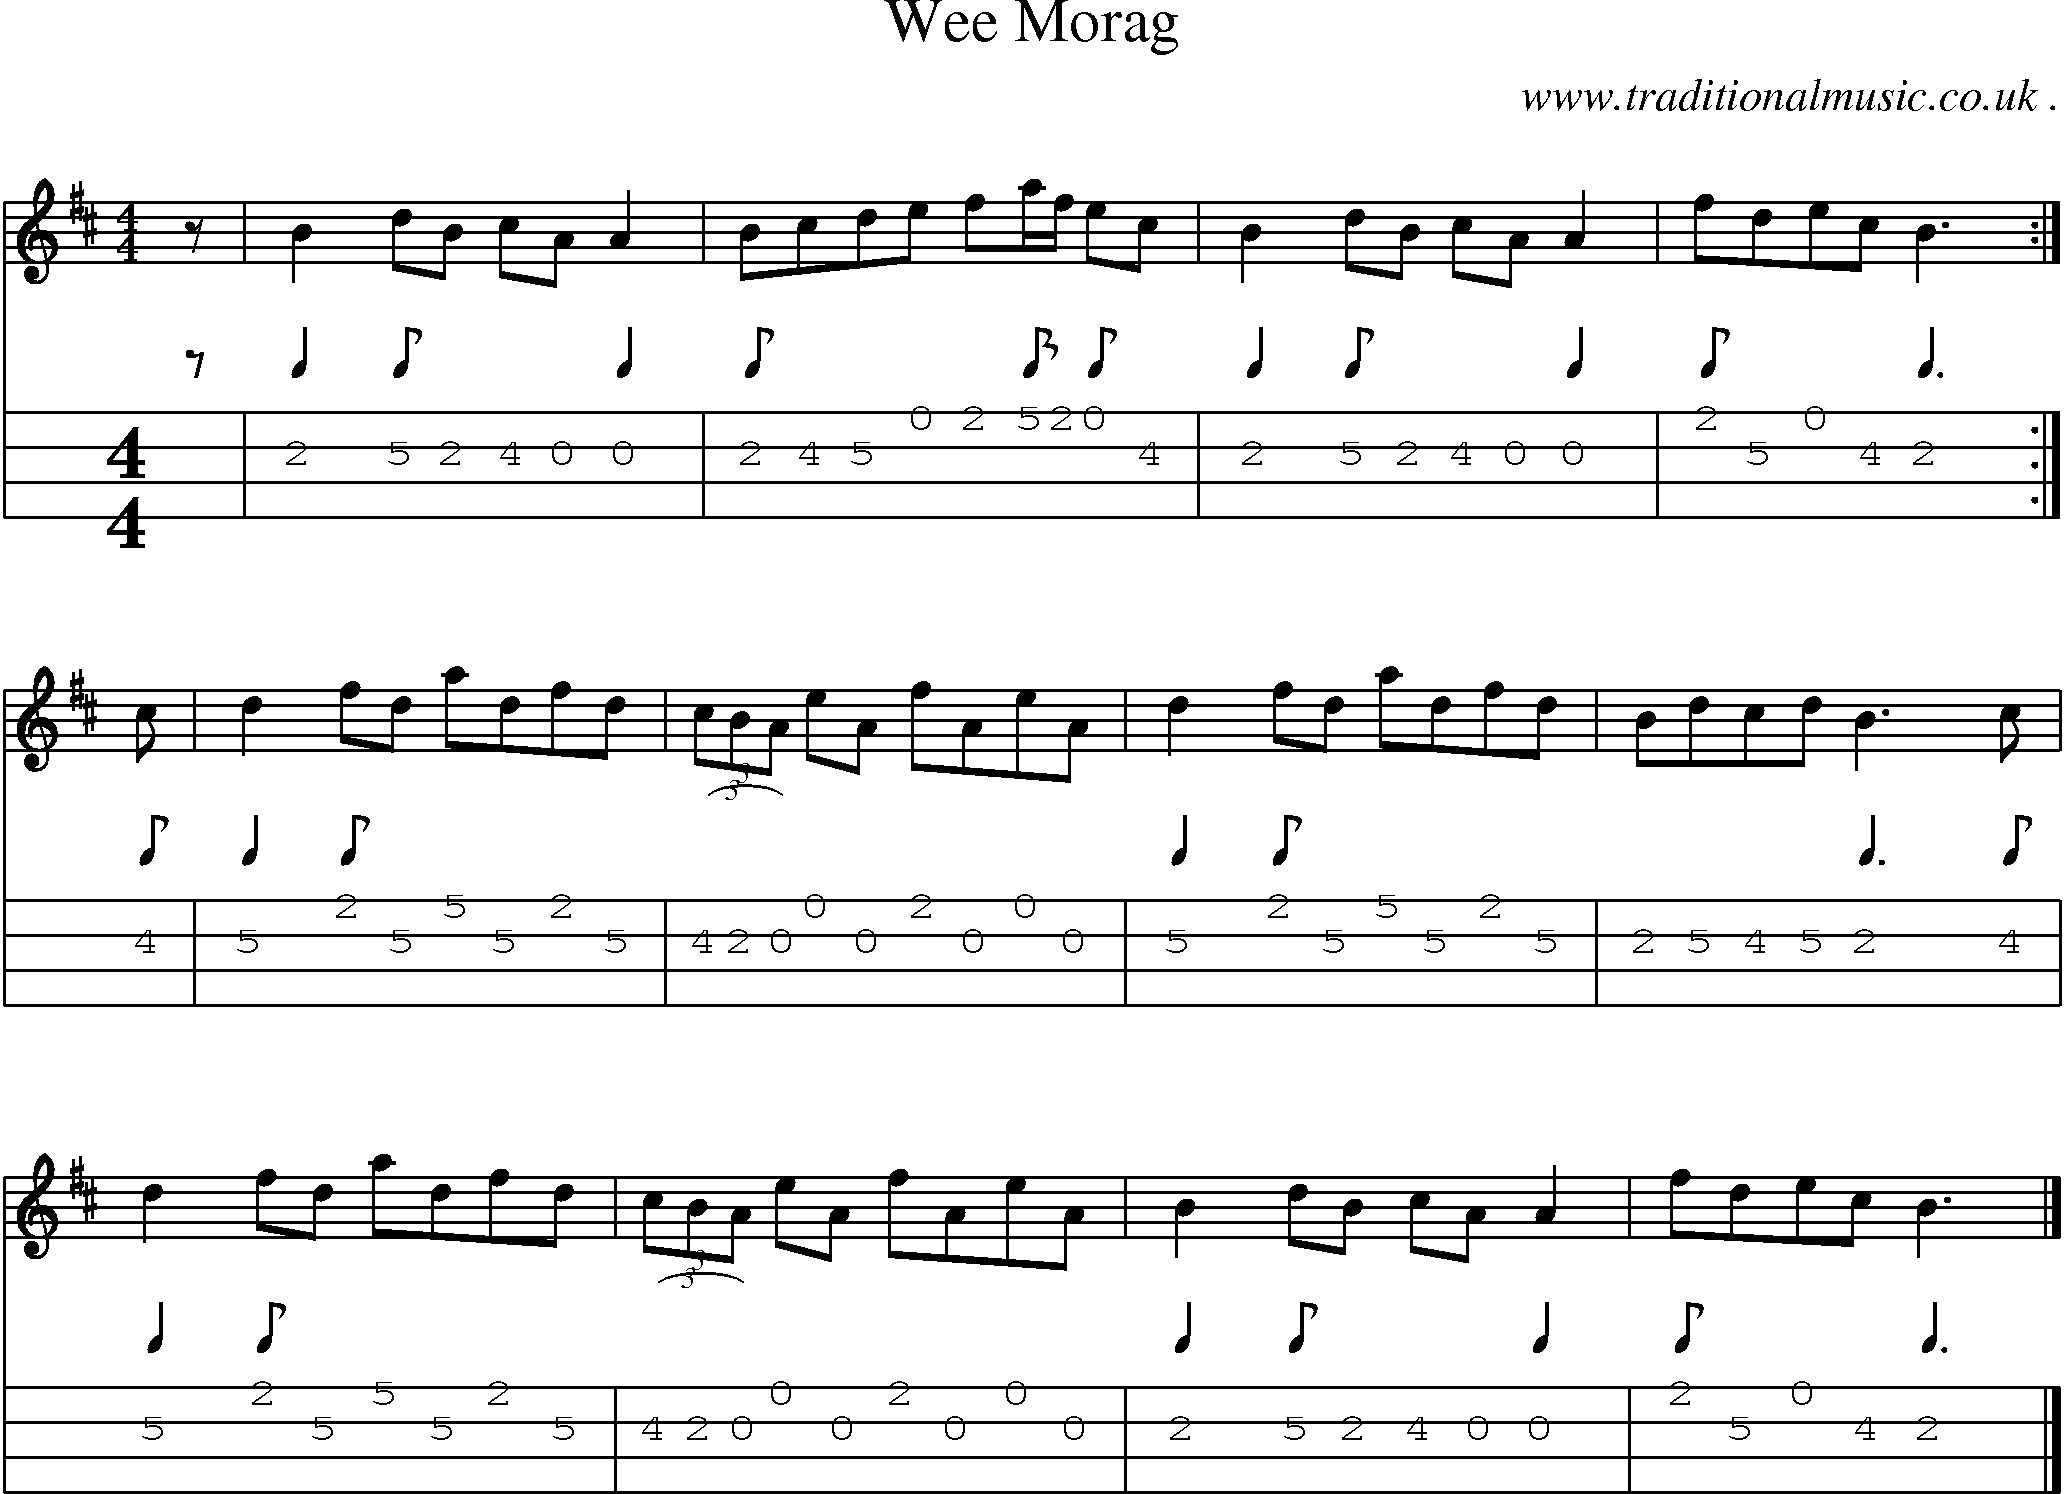 Sheet-music  score, Chords and Mandolin Tabs for Wee Morag